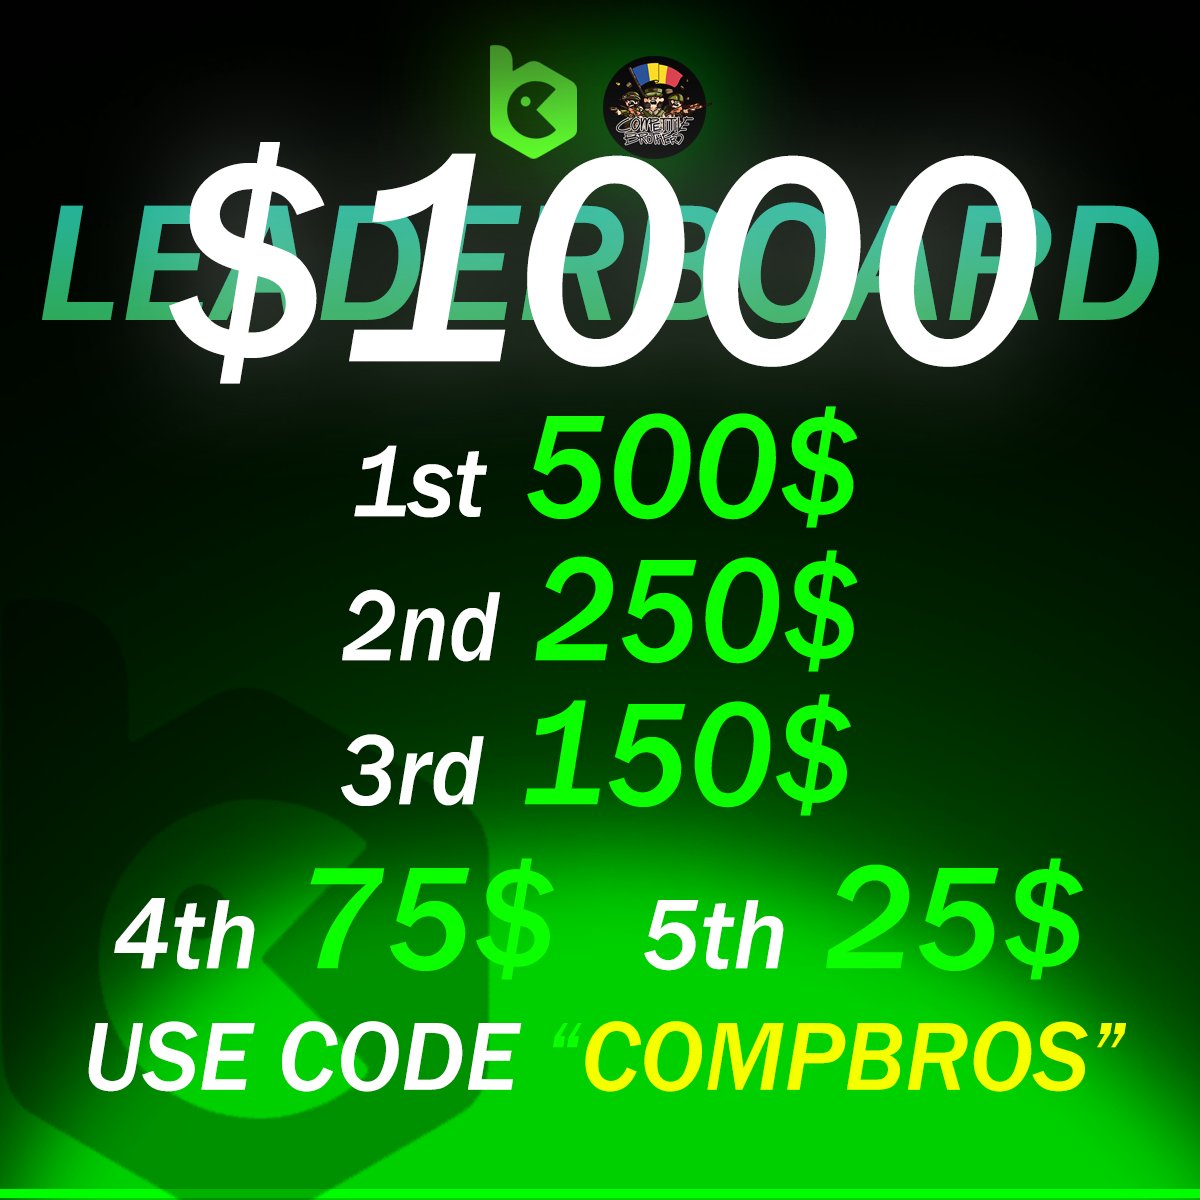 $1000 NEW BCGAME LEADERBOARD! 1 Repost + Tag friends to win $50 Deposit and wager on BCGAME using code 'COMPBROS' or our custom link bit.ly/4bP4B1k to get an instant 300% deposit bonus, a free spin up to 5 bitcoin and also raffle tickets to the lottery! Top wagers…